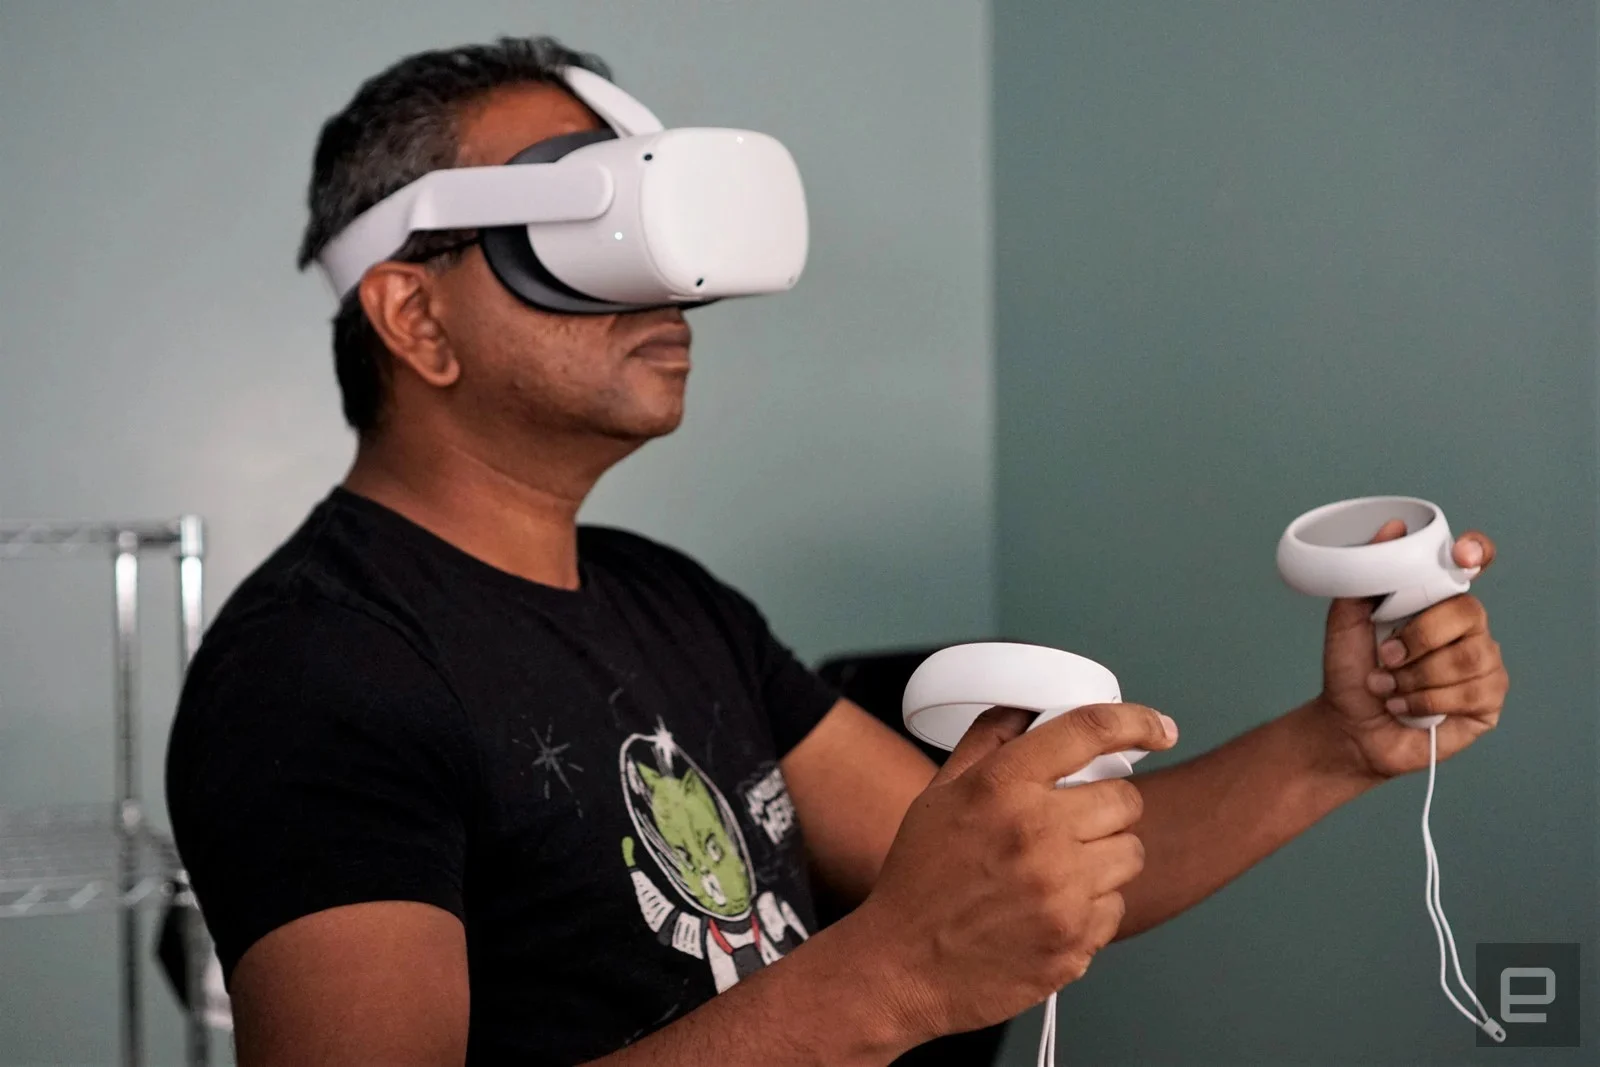 Oculus Quest 2 in white, played by Devindra Hardawar